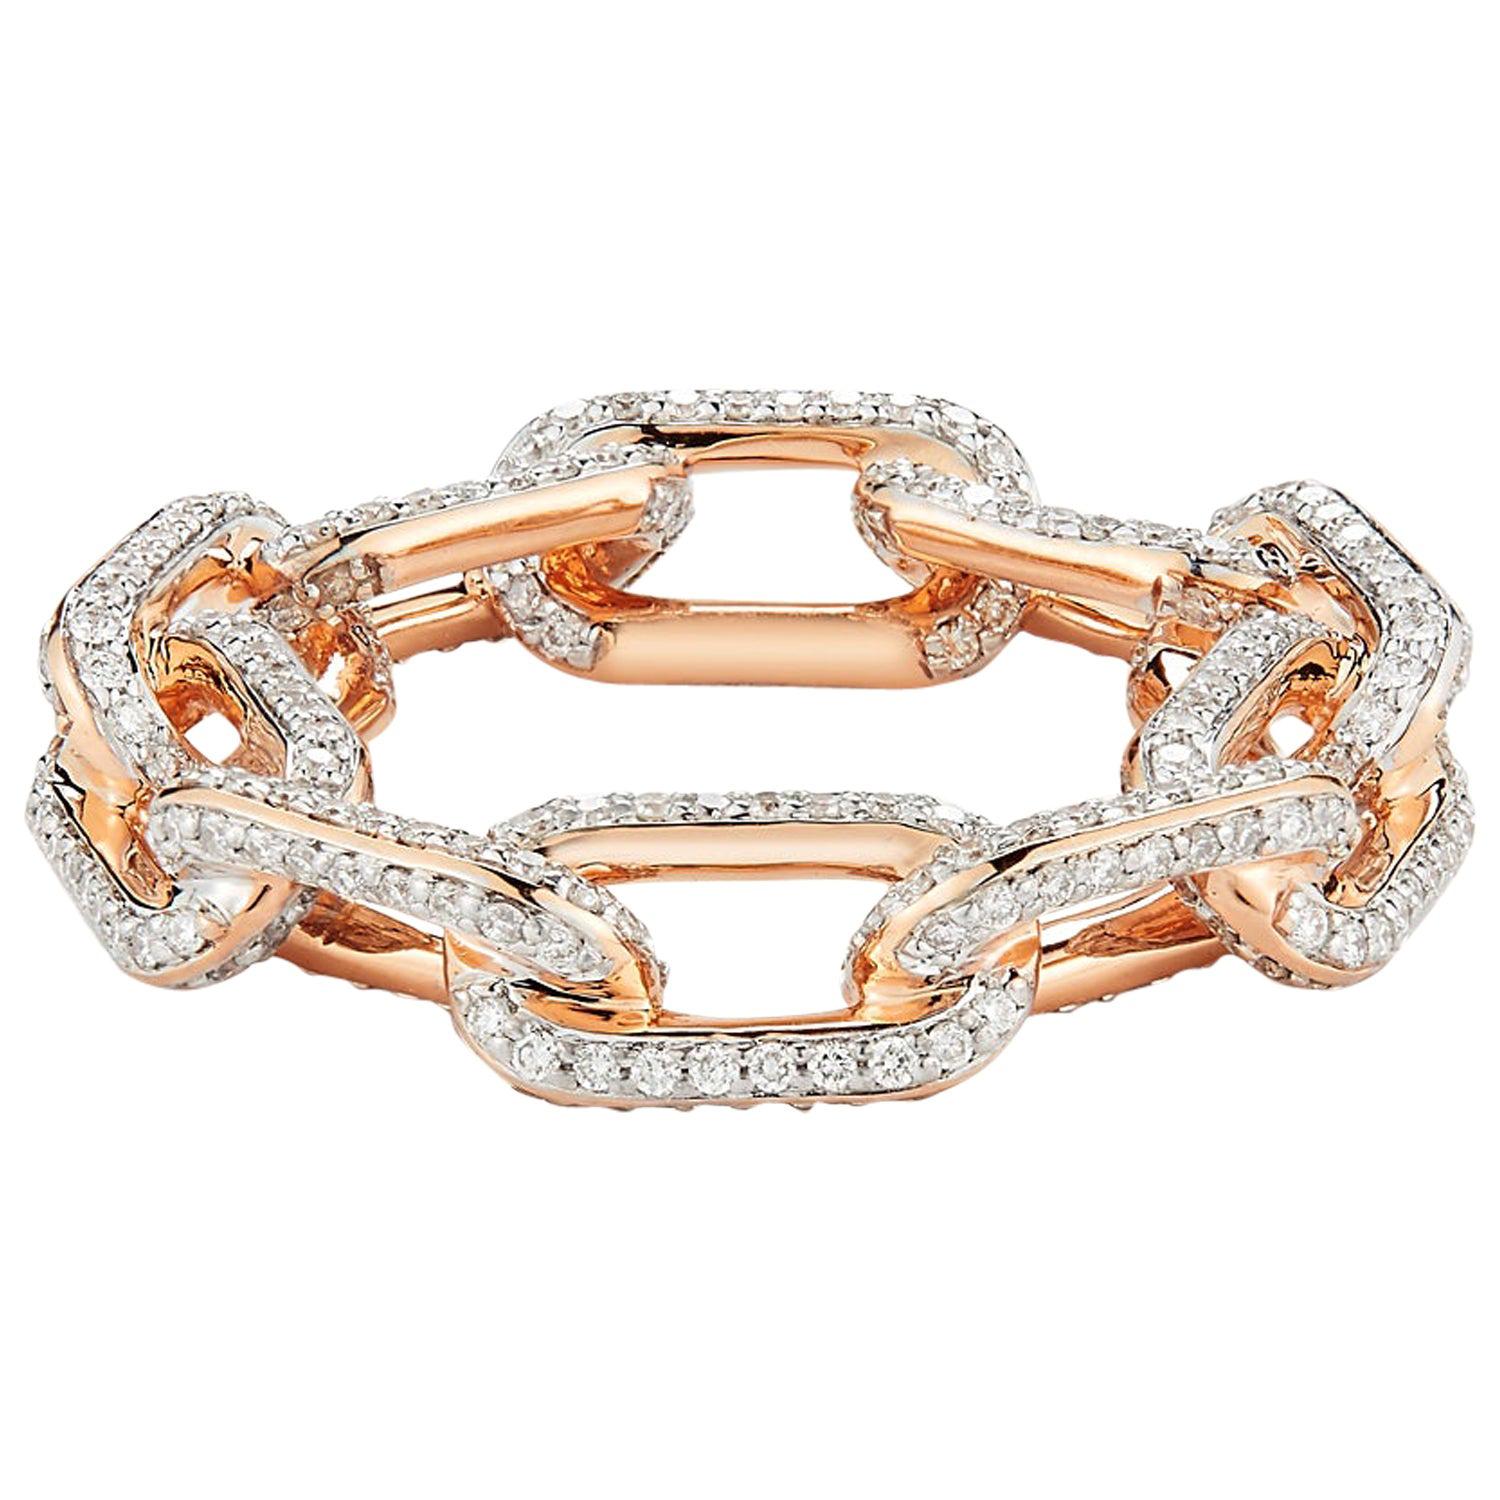 Walters Faith 18 Karat Rose Gold and All Diamond Large Chain Link Ring